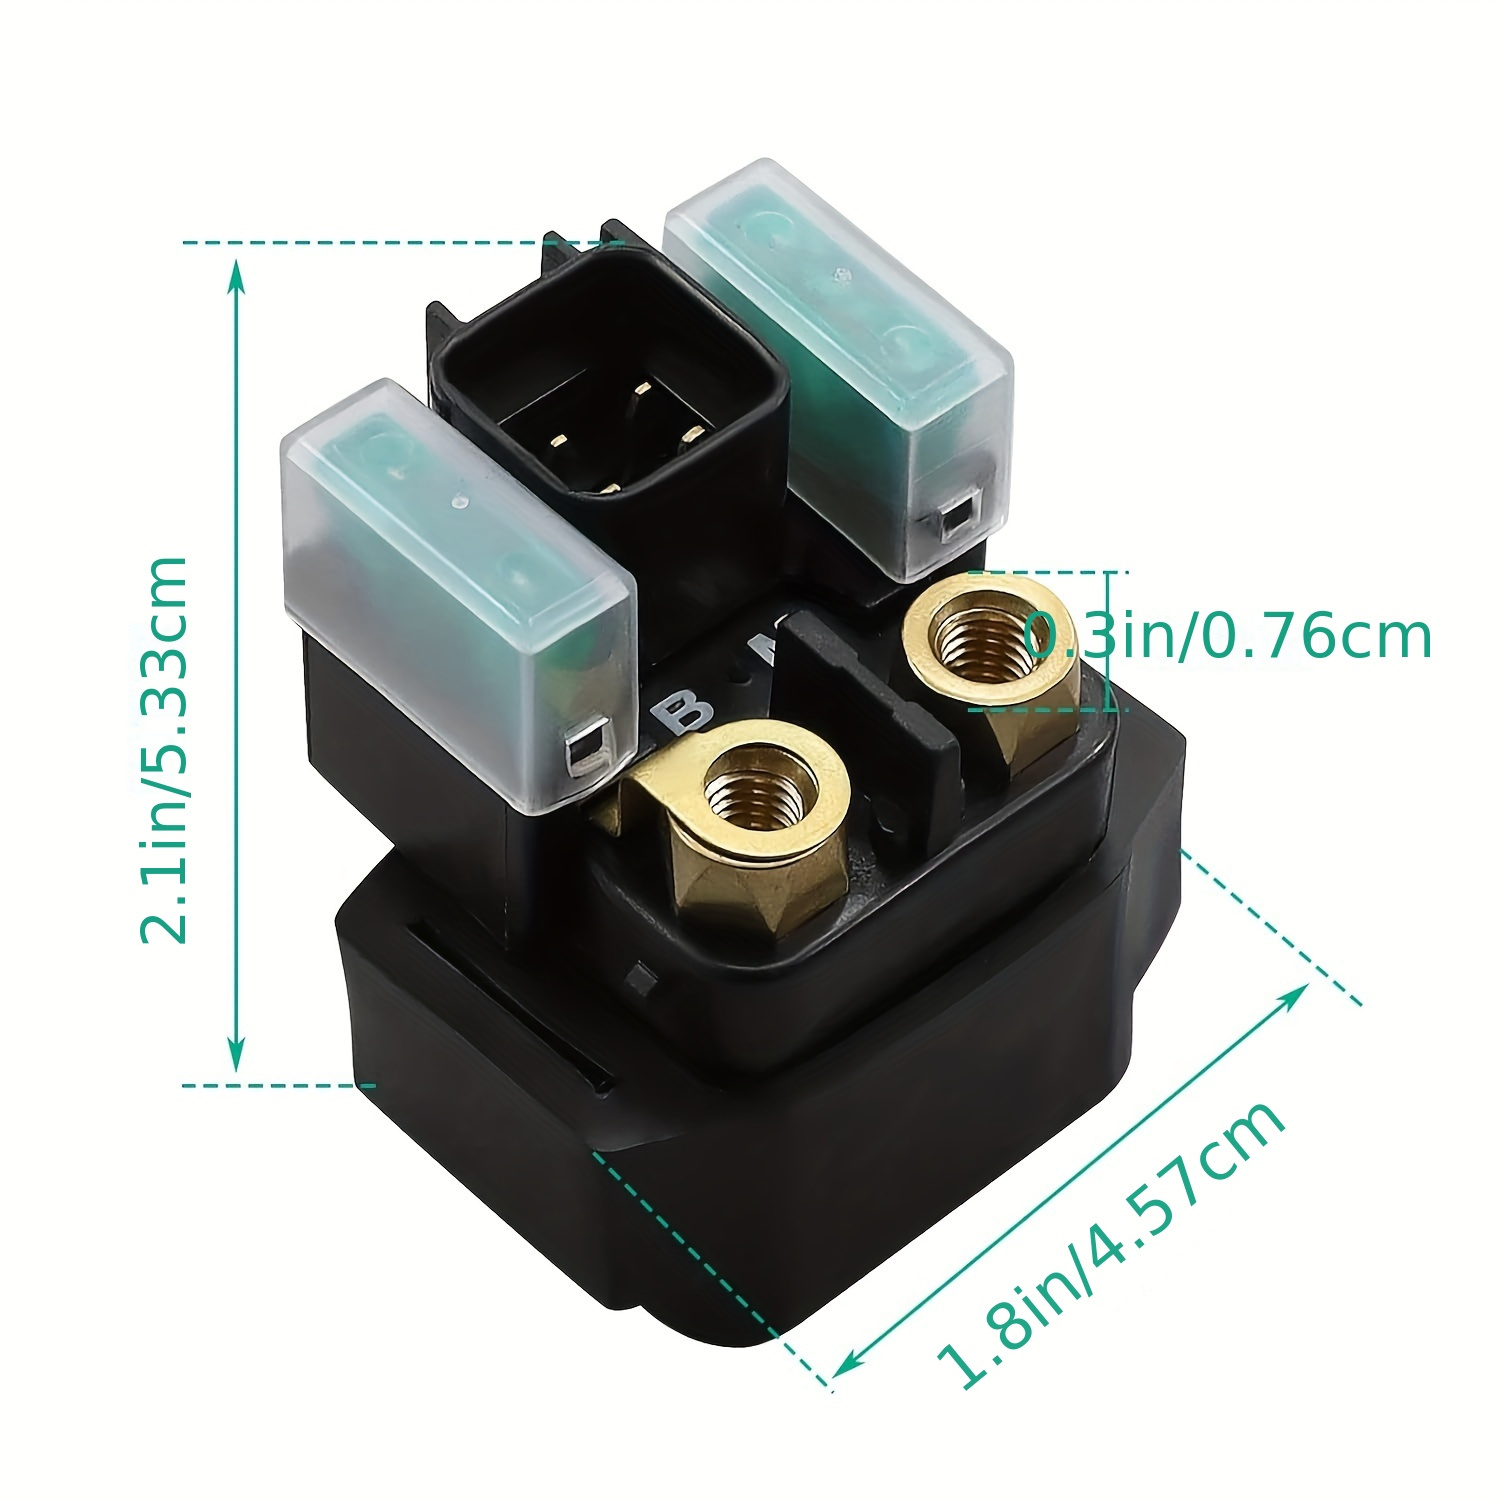 https://img.kwcdn.com/product/fancyalgo/toaster-api/toaster-processor-image-cm2in/a52c1f7e-7341-11ee-be16-0a580a682c59.jpg?imageMogr2/auto-orient%7CimageView2/2/w/800/q/70/format/webp